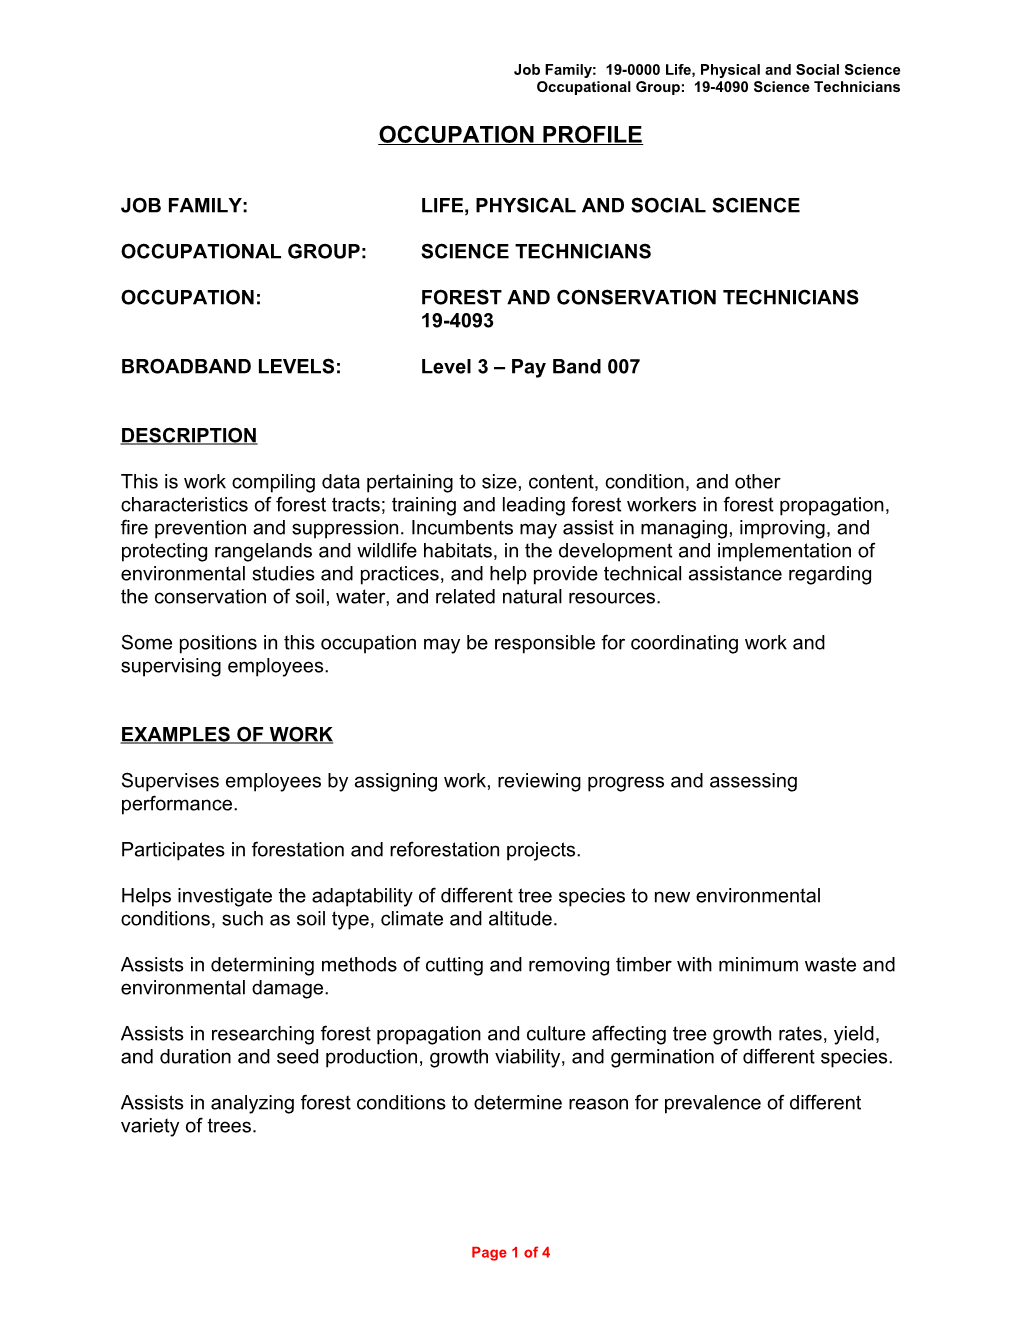 Job Family: 19-0000 Life, Physical and Social Science s2